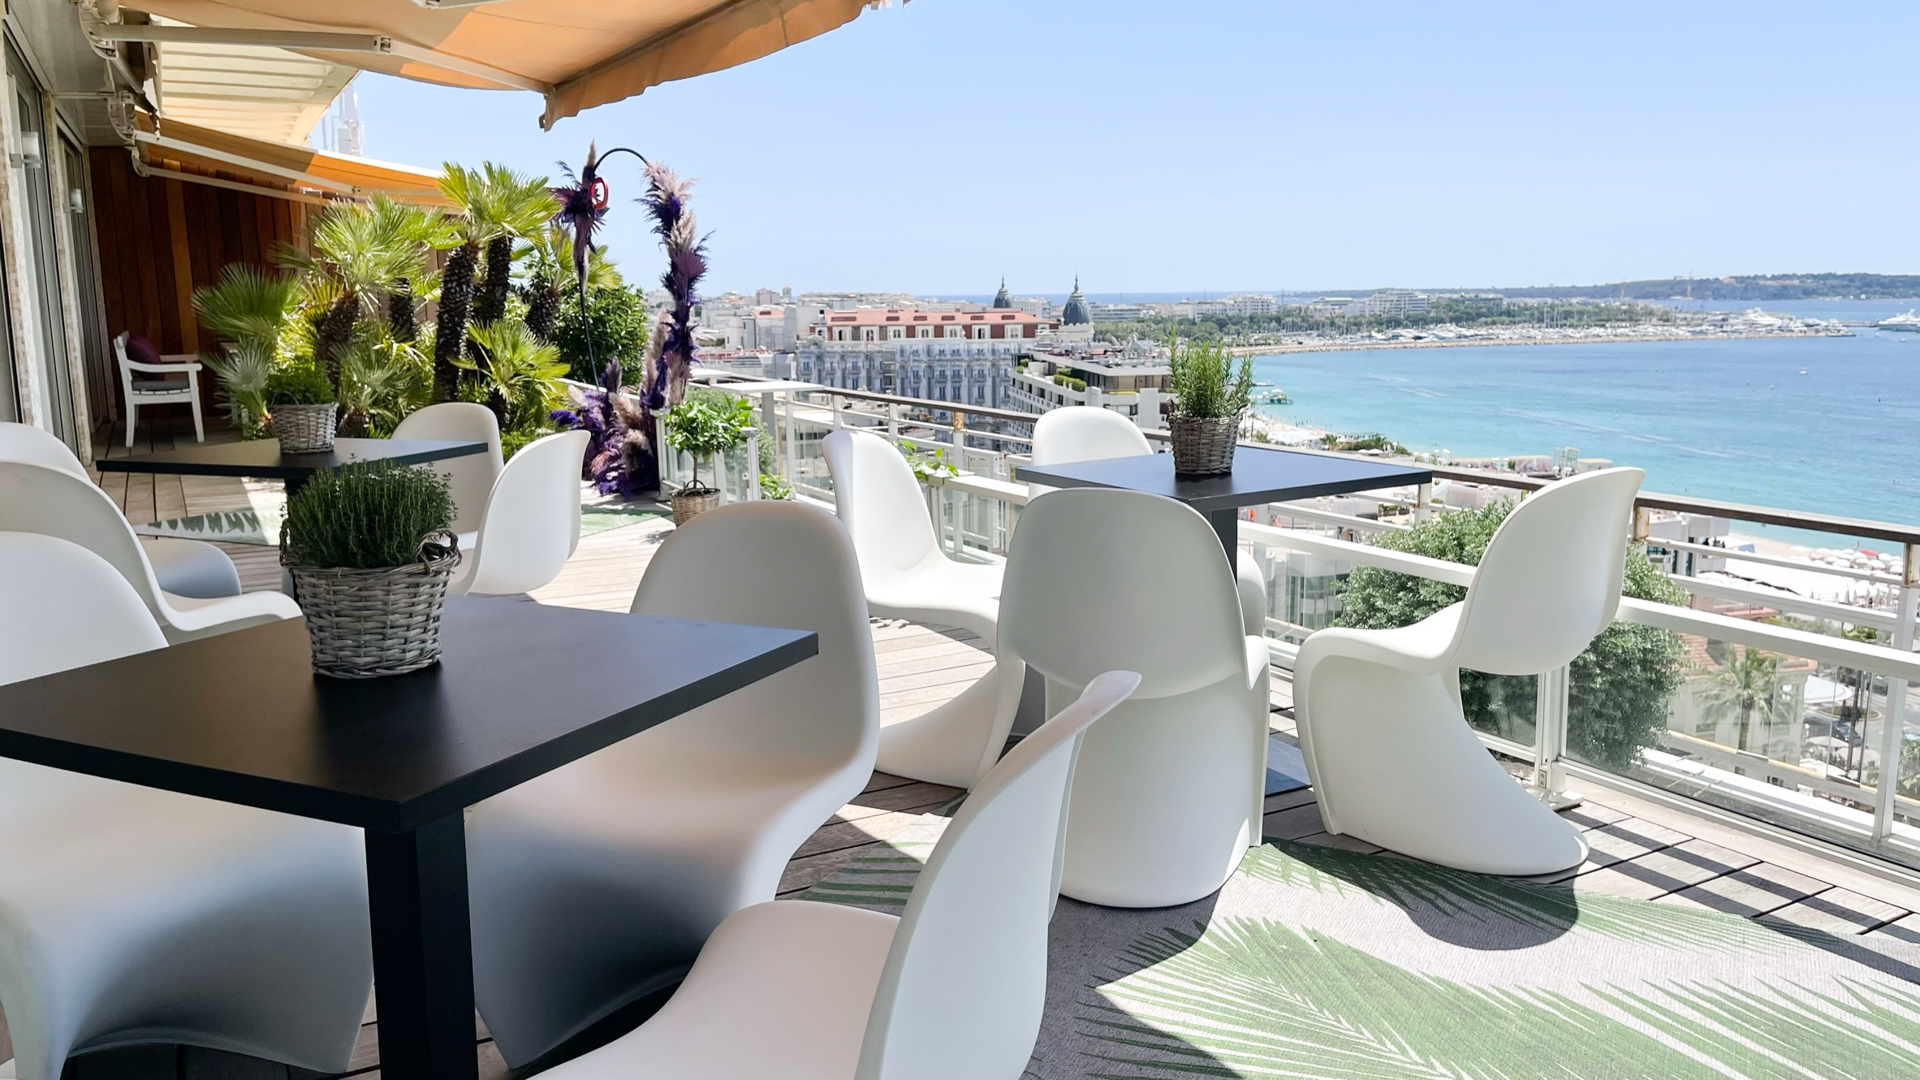 Cannes Lions 2022 penthouse terrace view over Cannes seaview